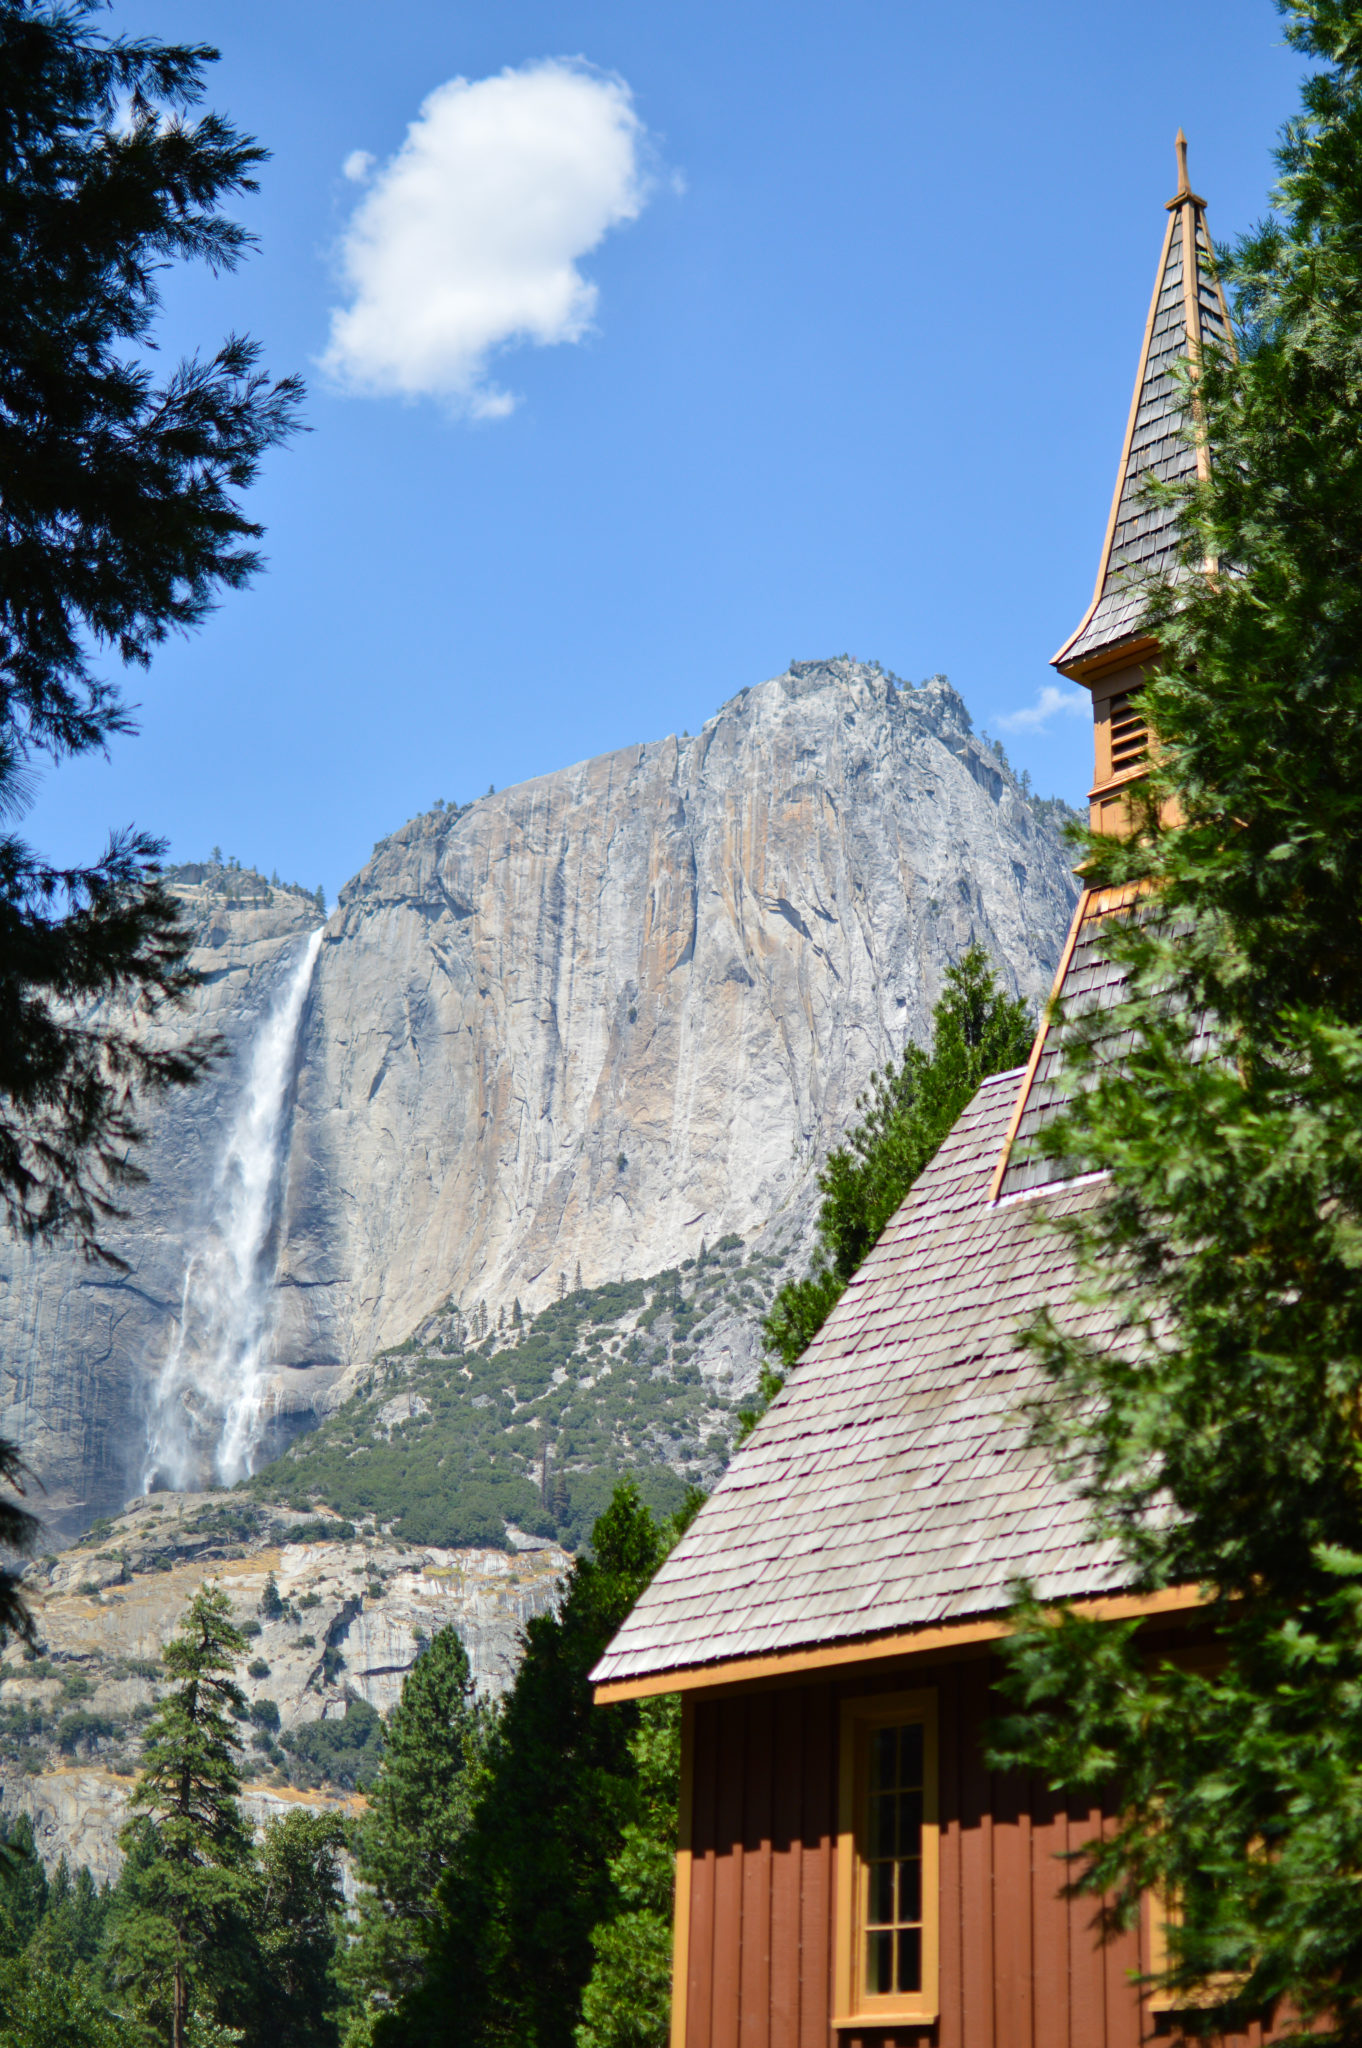 things to do in yosemite with kids